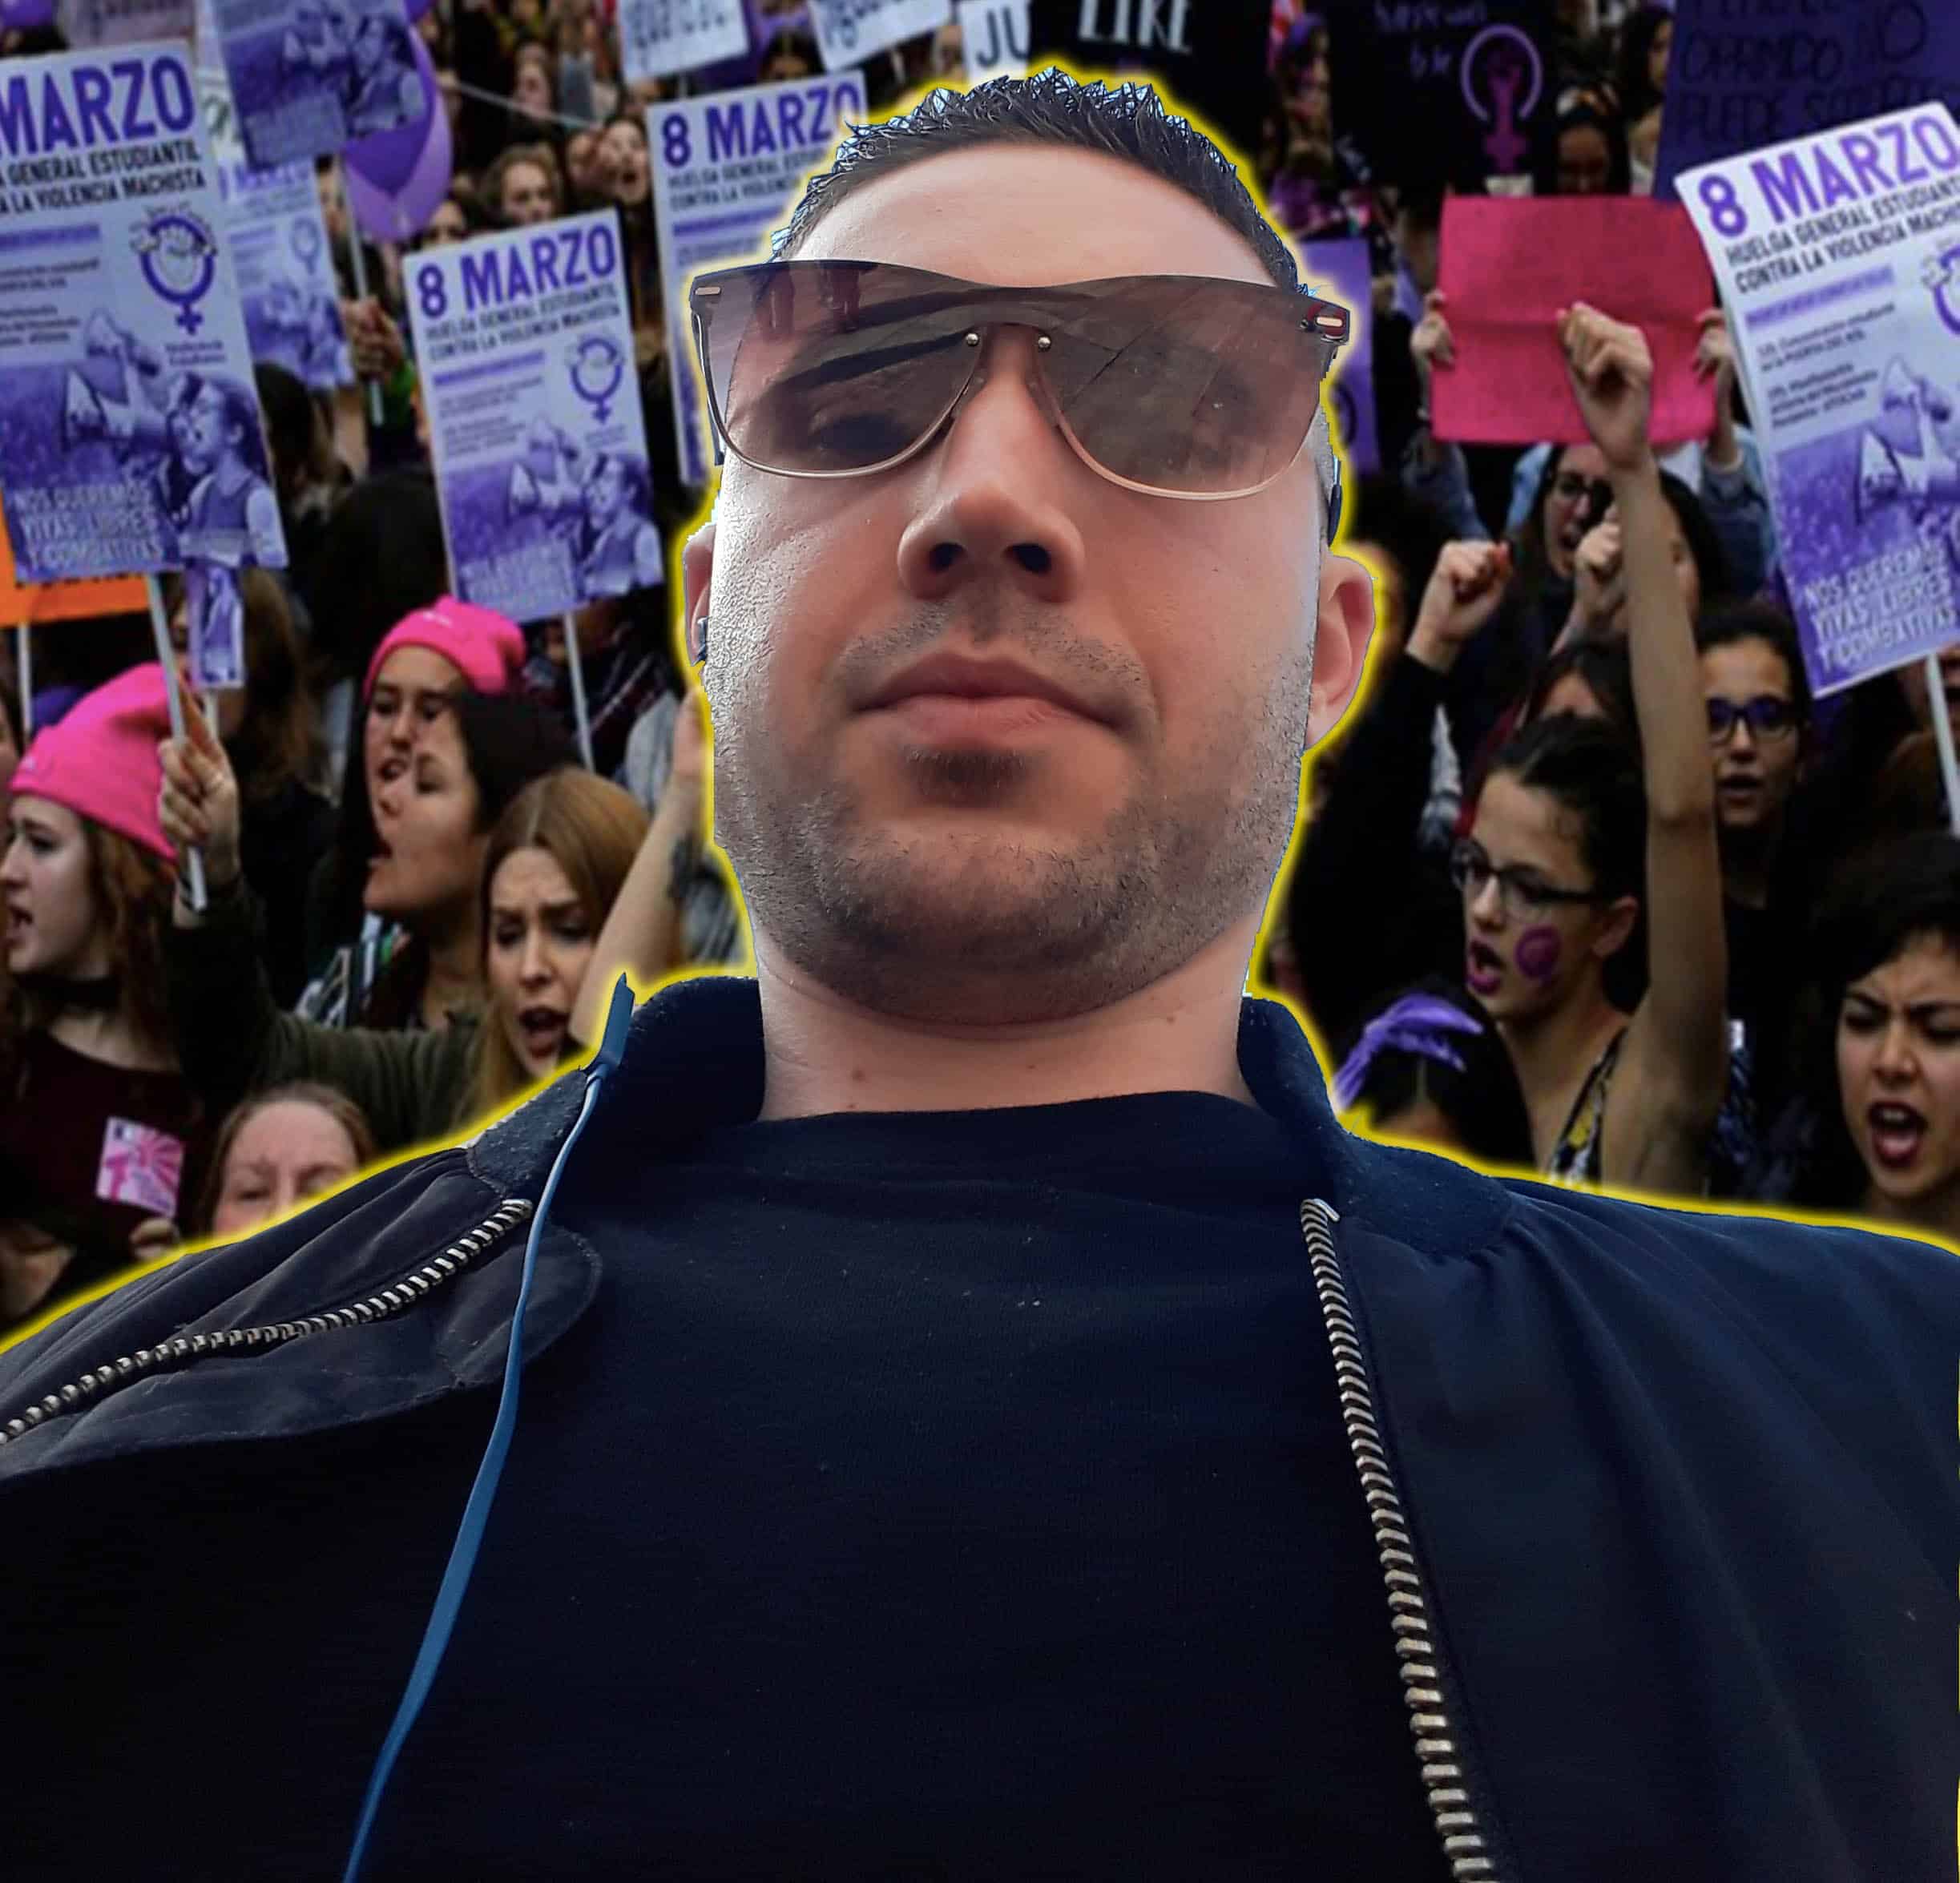 Alpha Male VOX Supporter OWNS Spanish Feminists At “Women’s Day” March